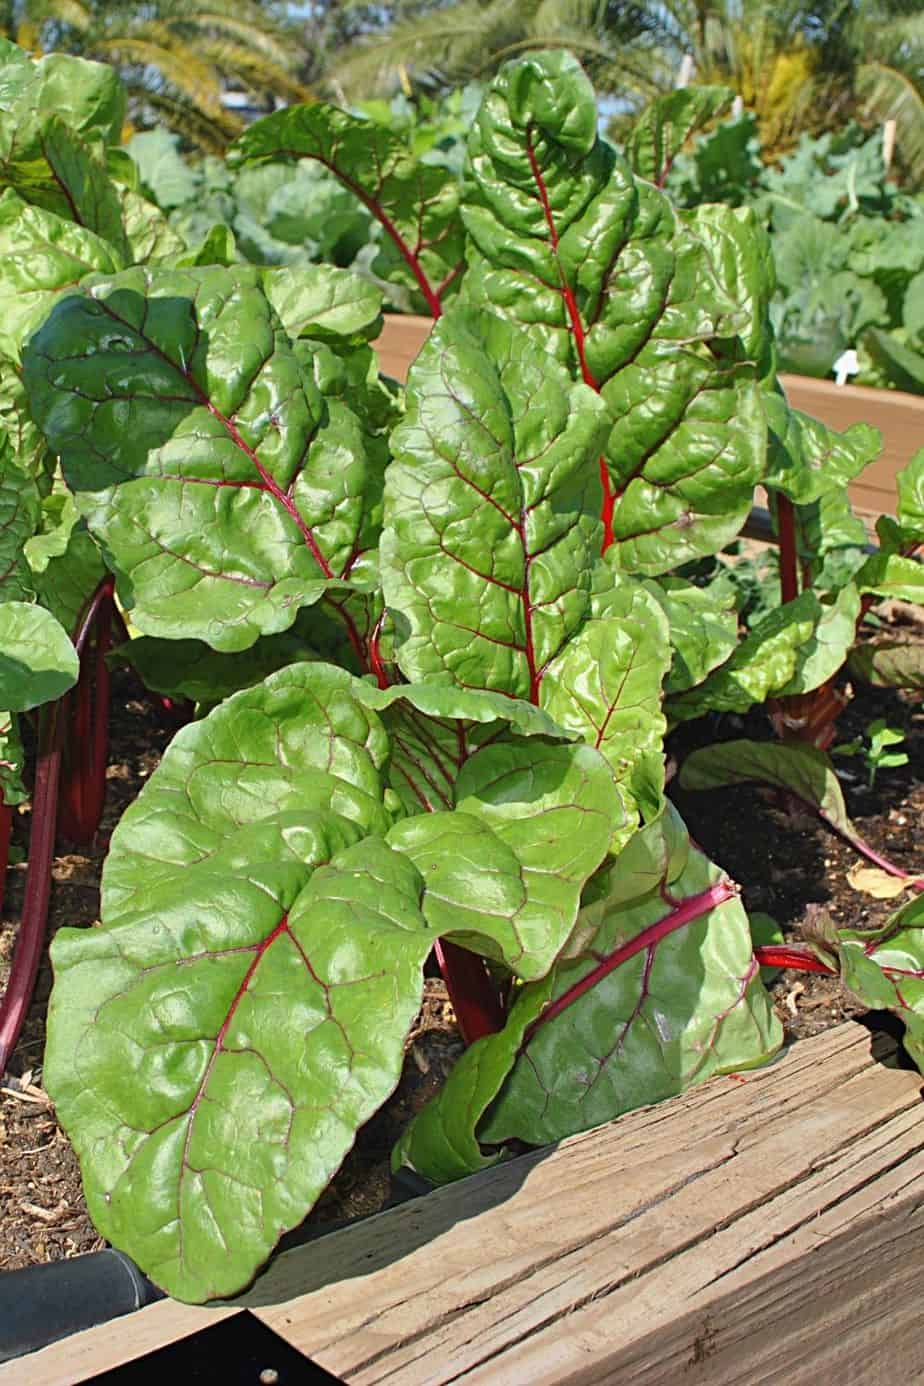 Chards, aka Leaf Beet, is another vegetable that grows well in raised beds